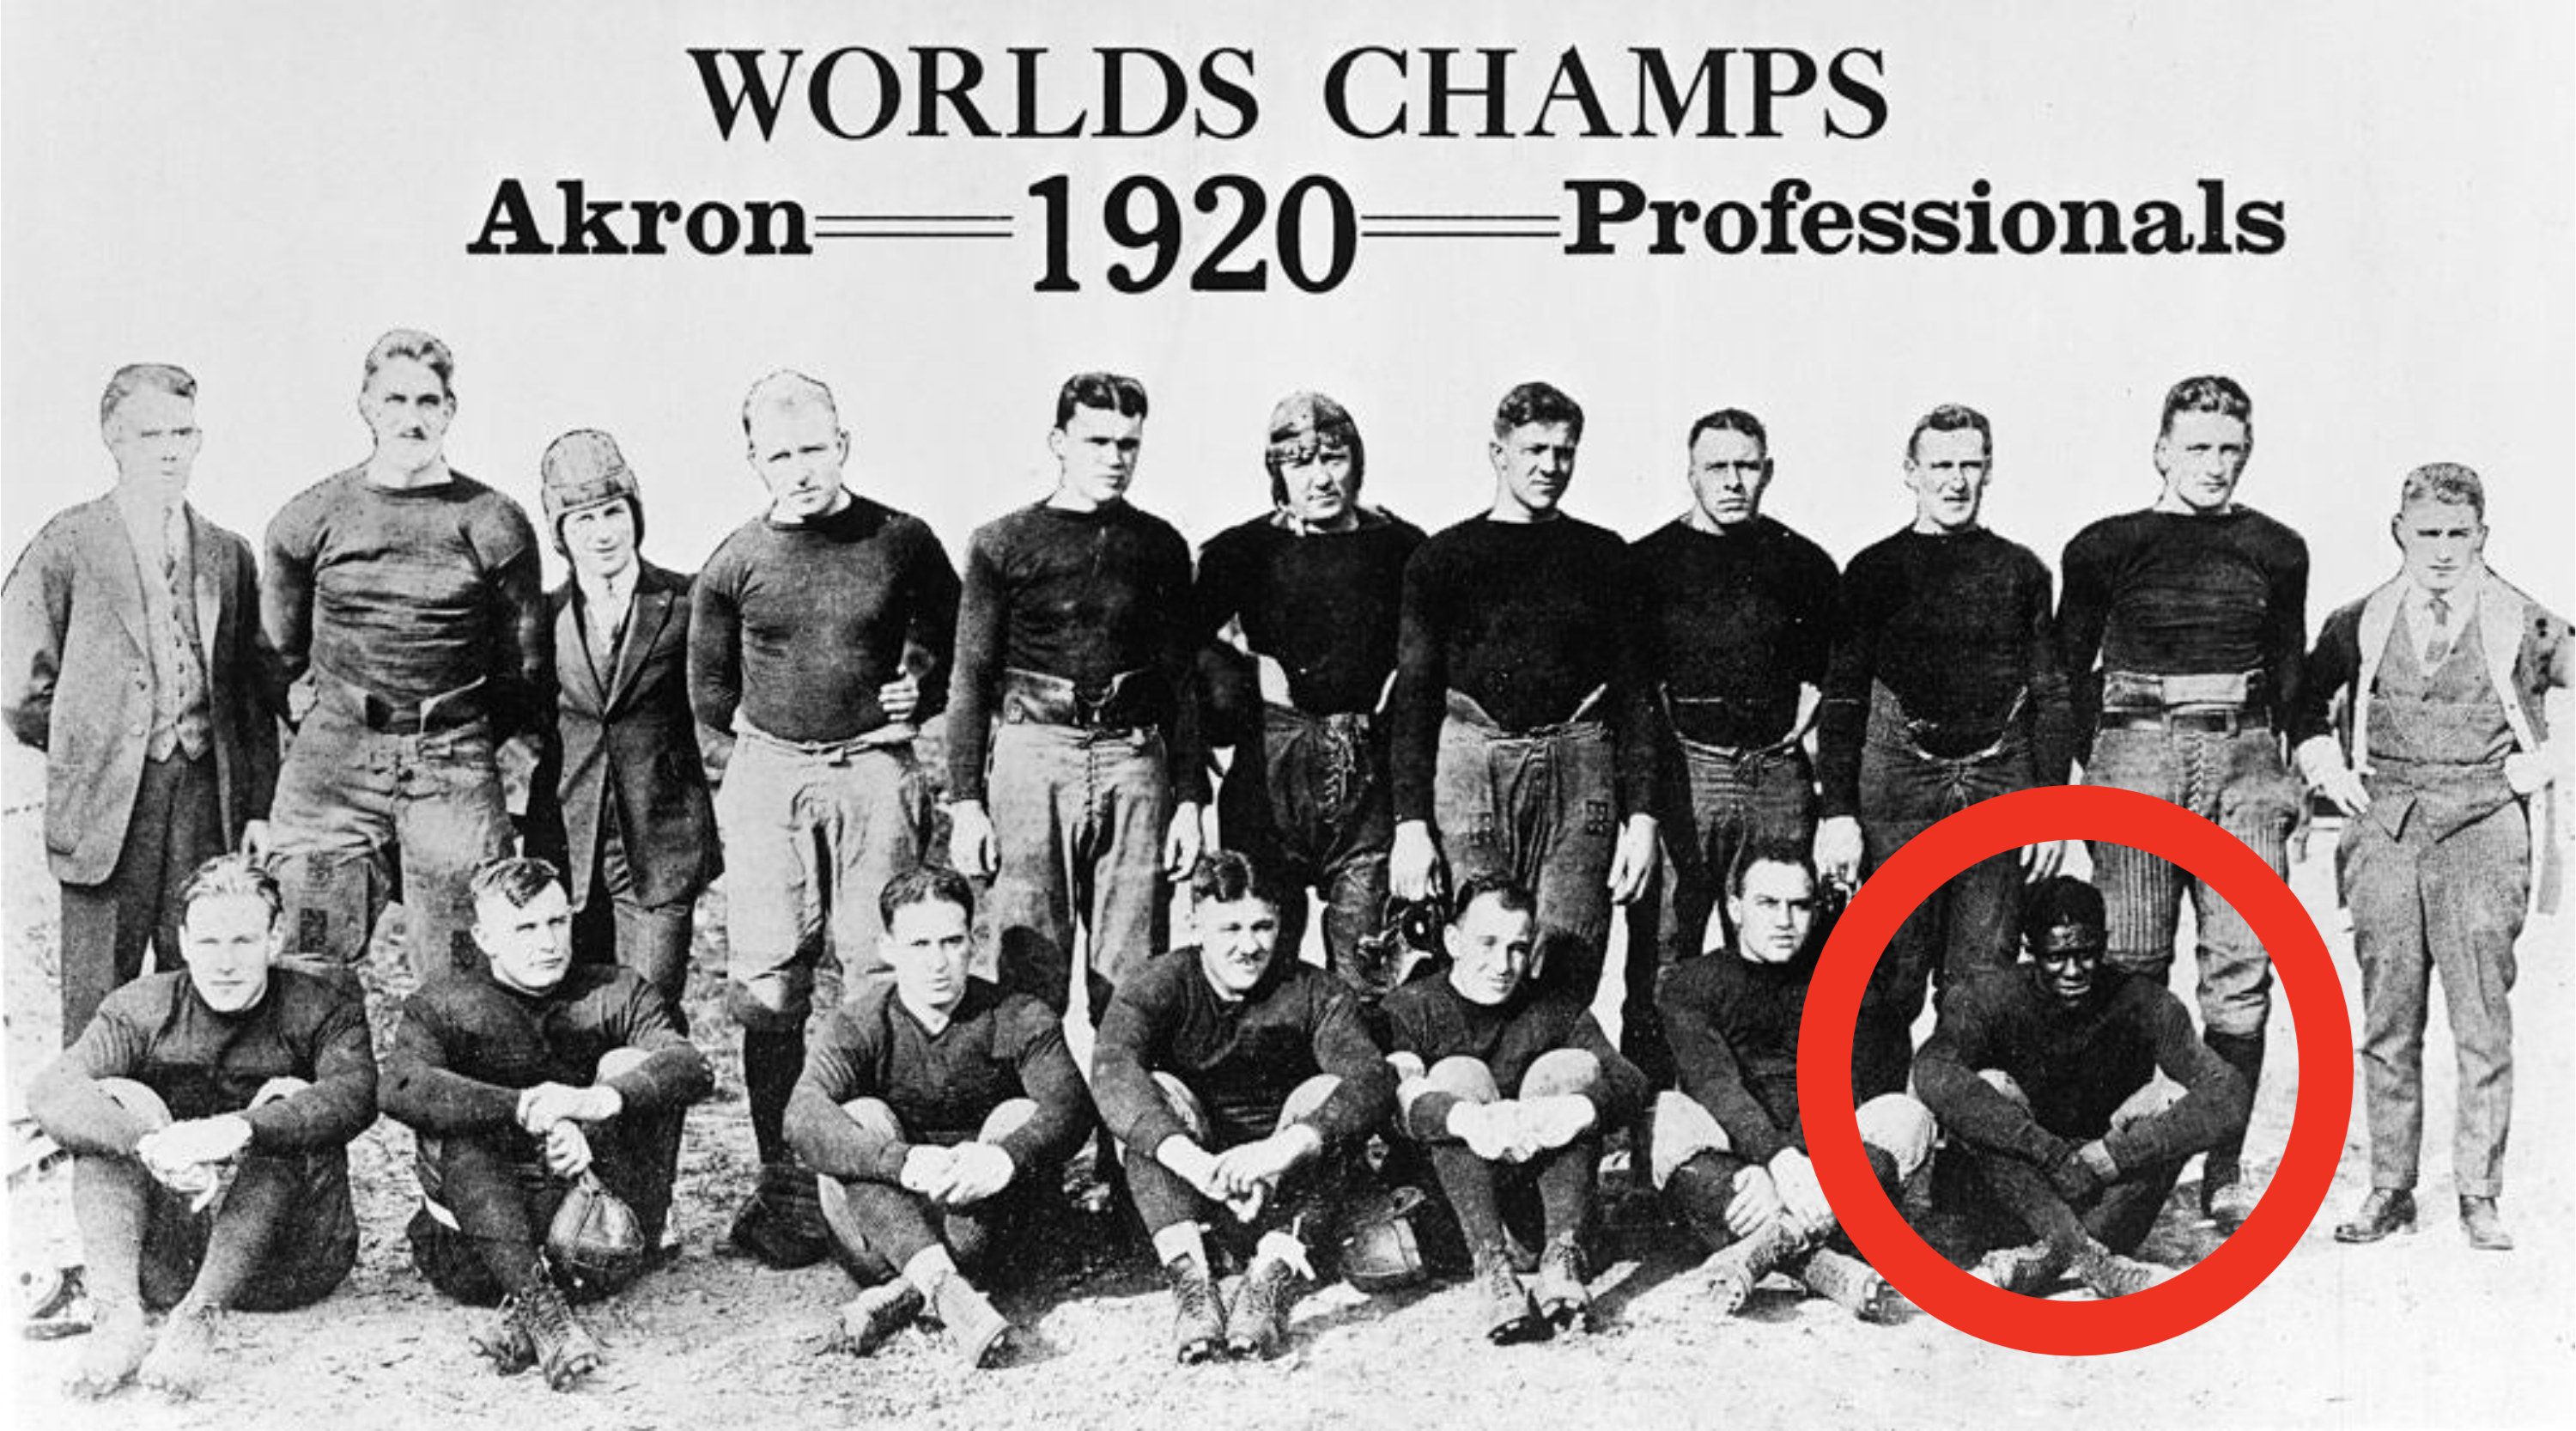 A football team photo with the only Black player circled